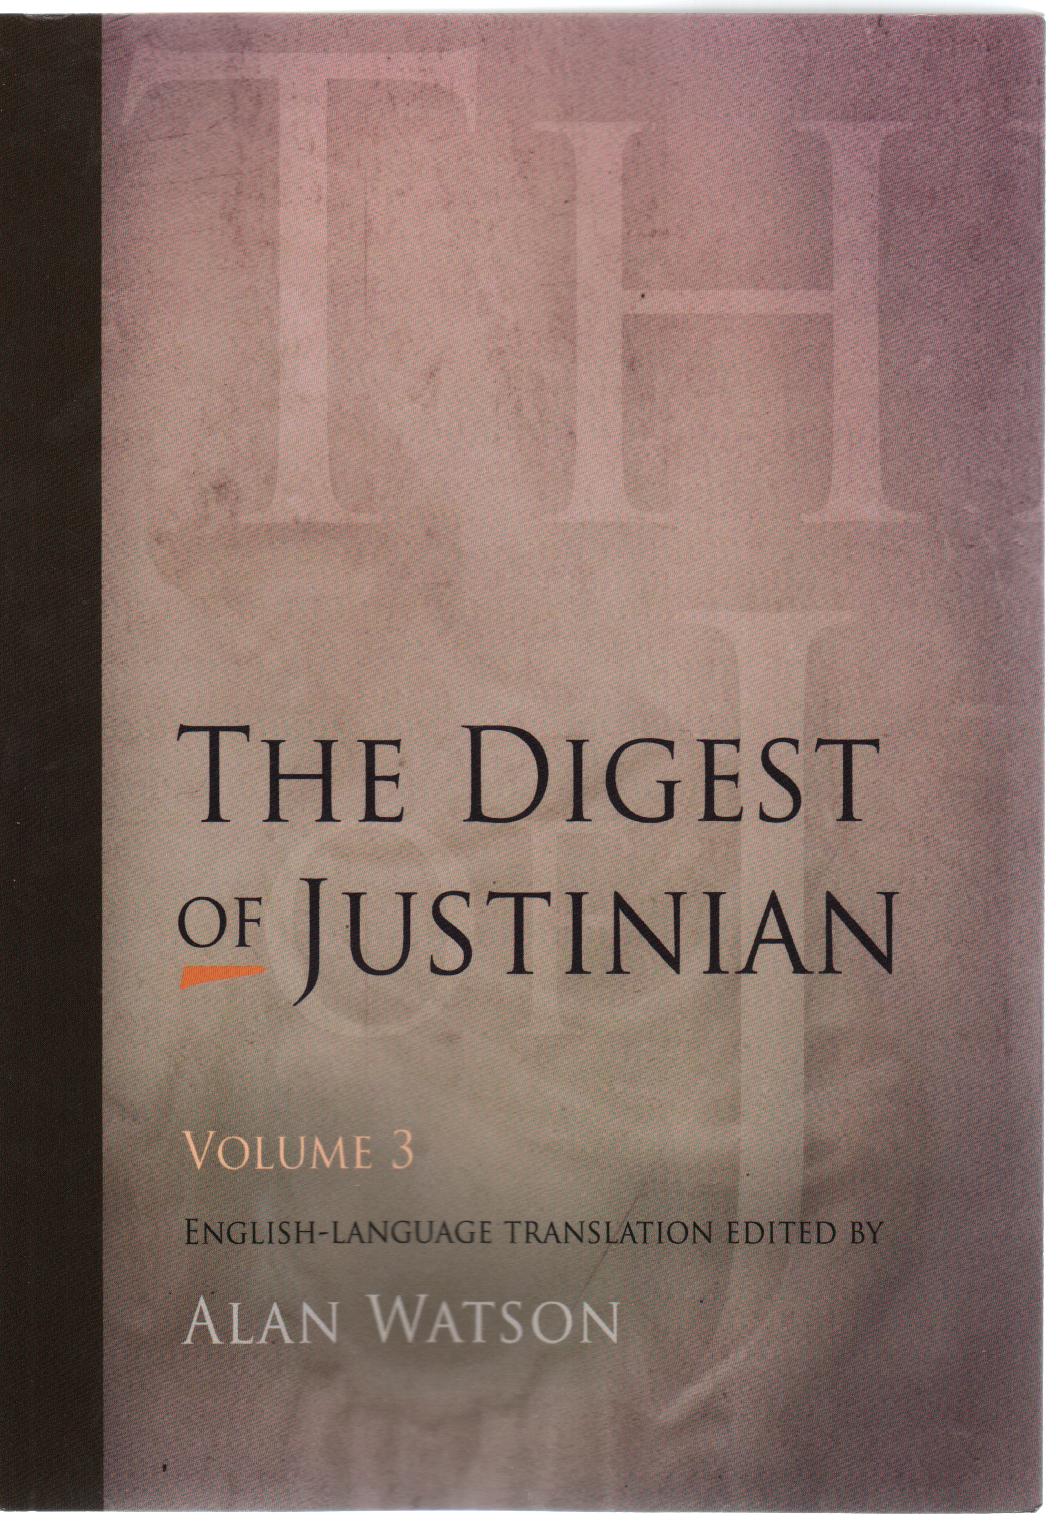 The Digest of Justinian Volume 3